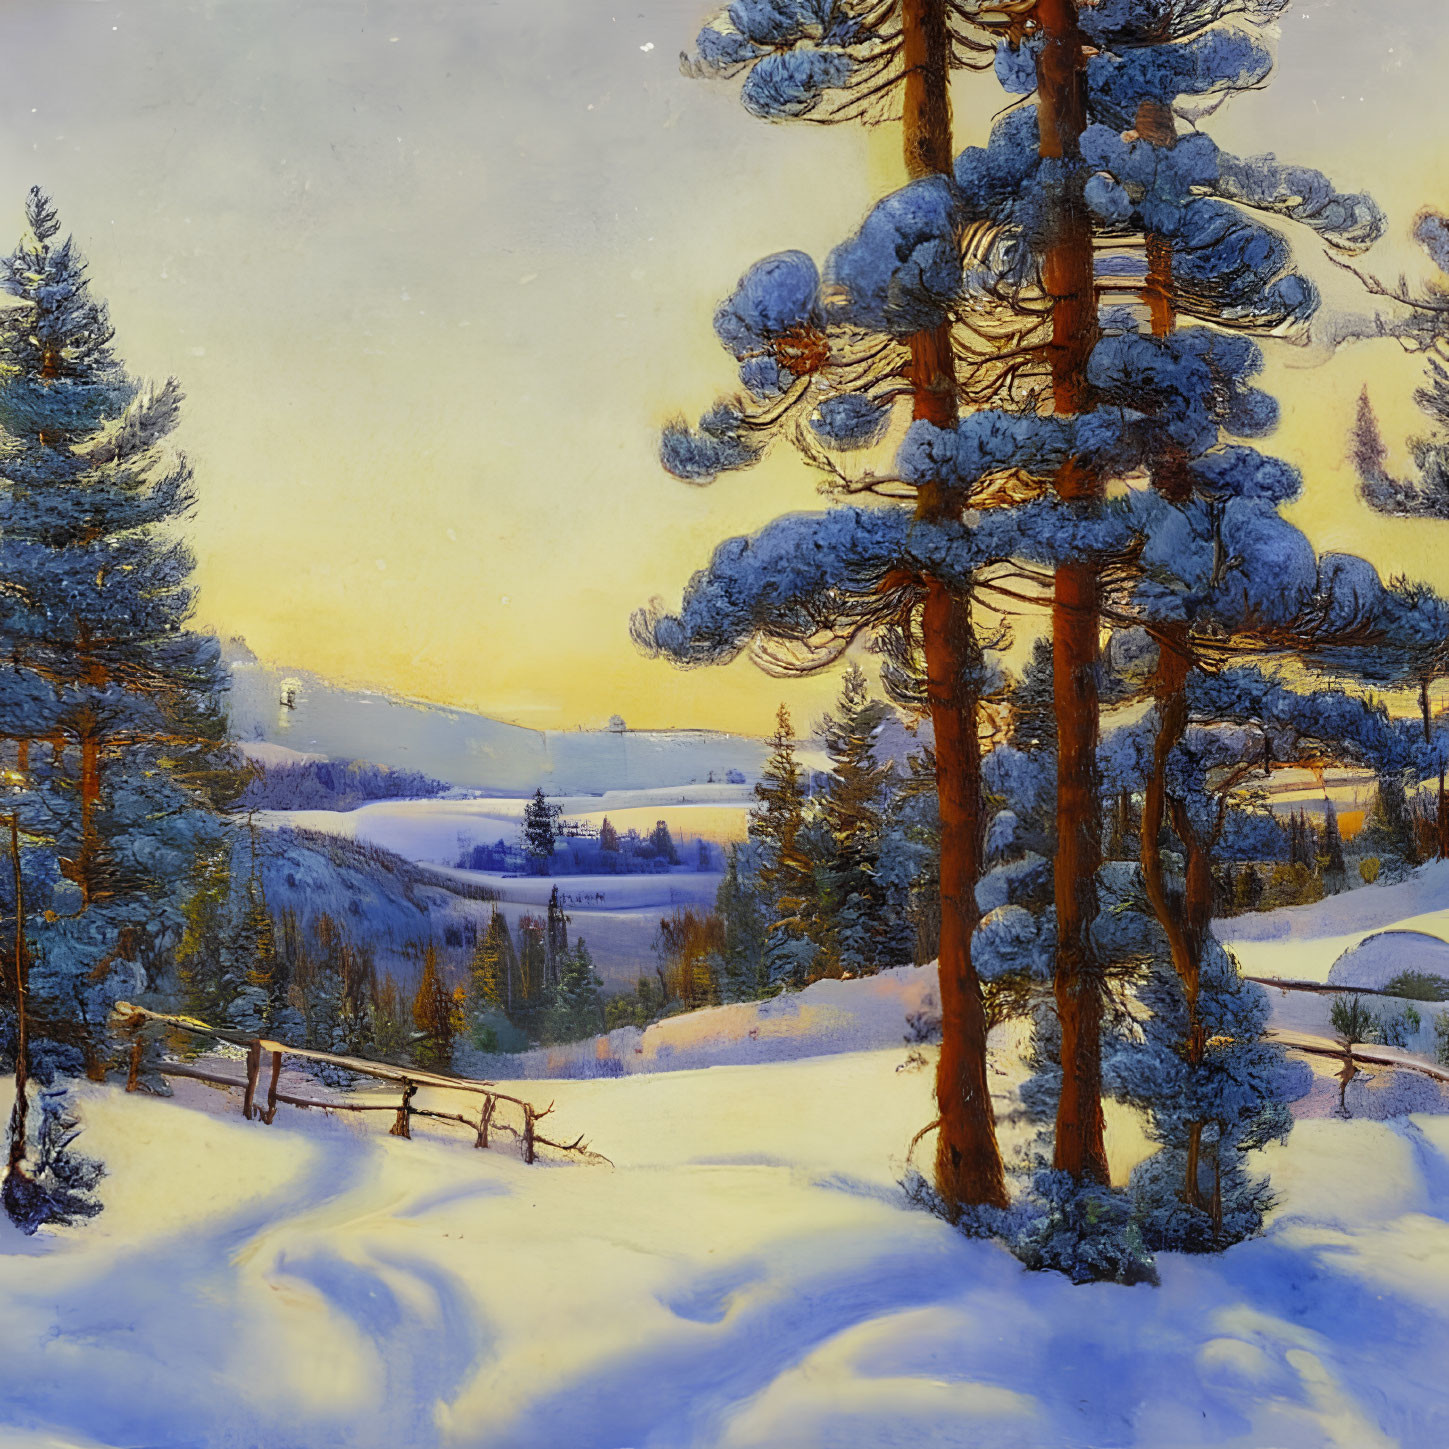 Snow-covered trees and wooden fence in sunset winter landscape